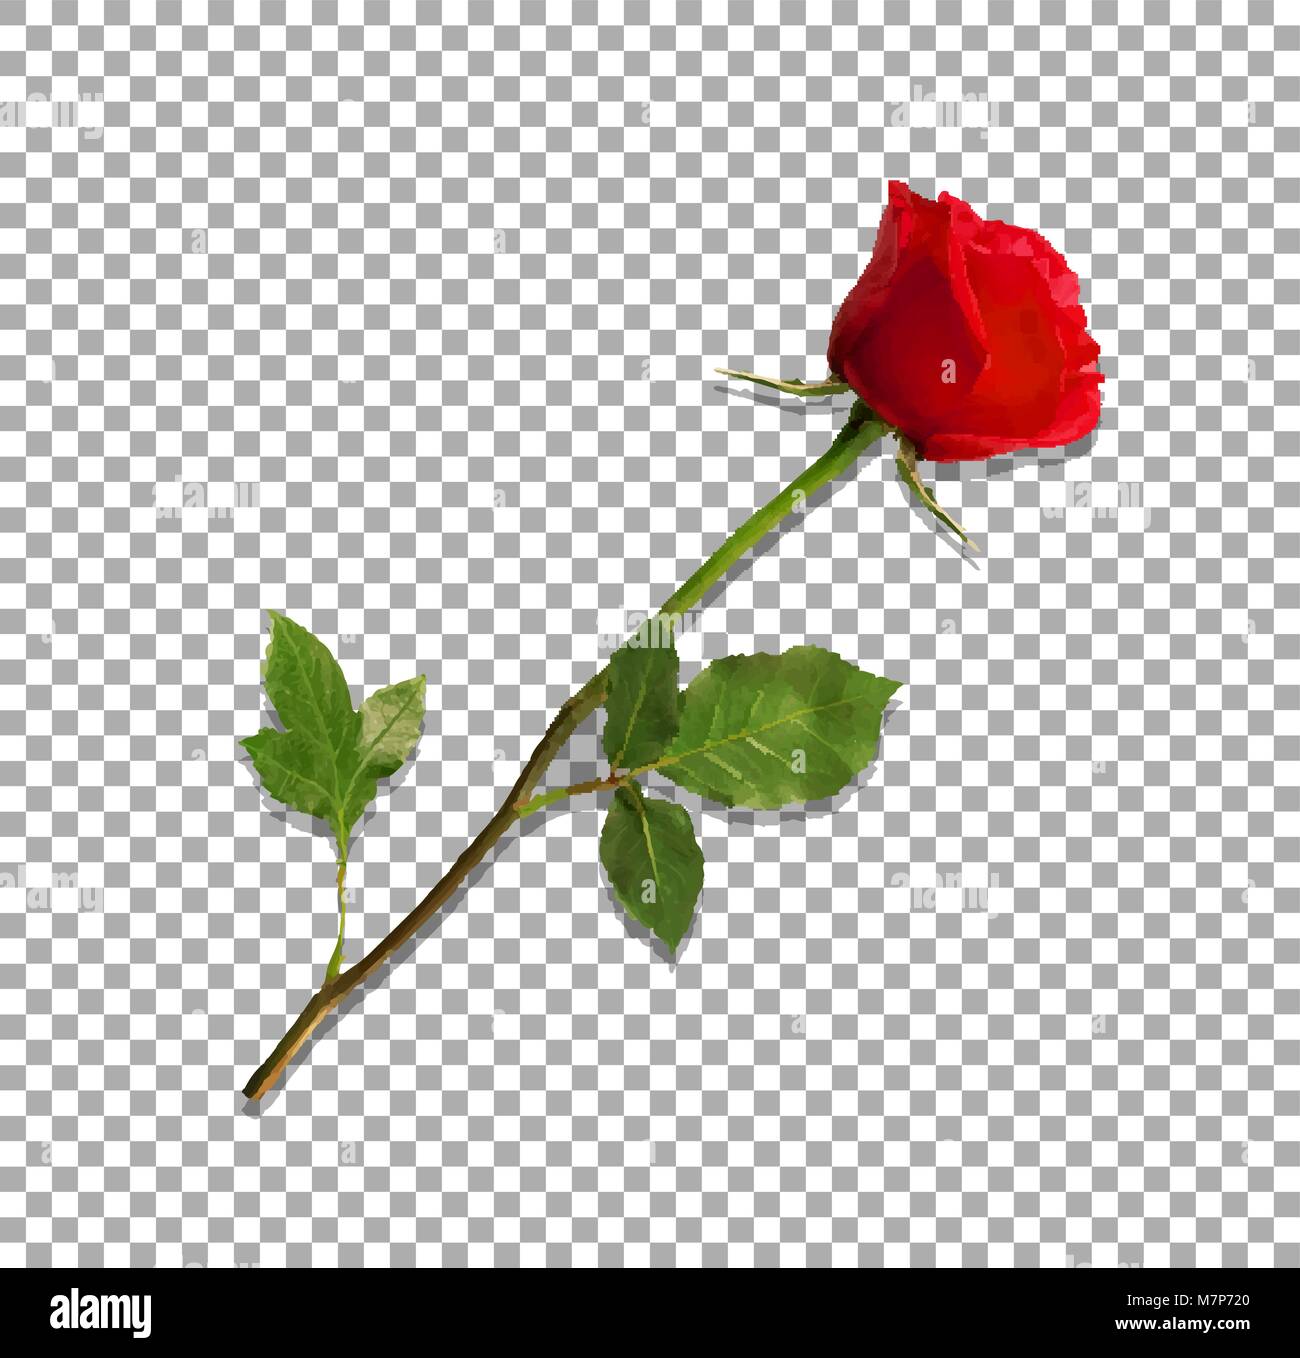 Vector illustration of photo-realistic, highly detailed flower of red rose isolated on transparent background. Beautiful bud of red rose on long stem. Stock Vector